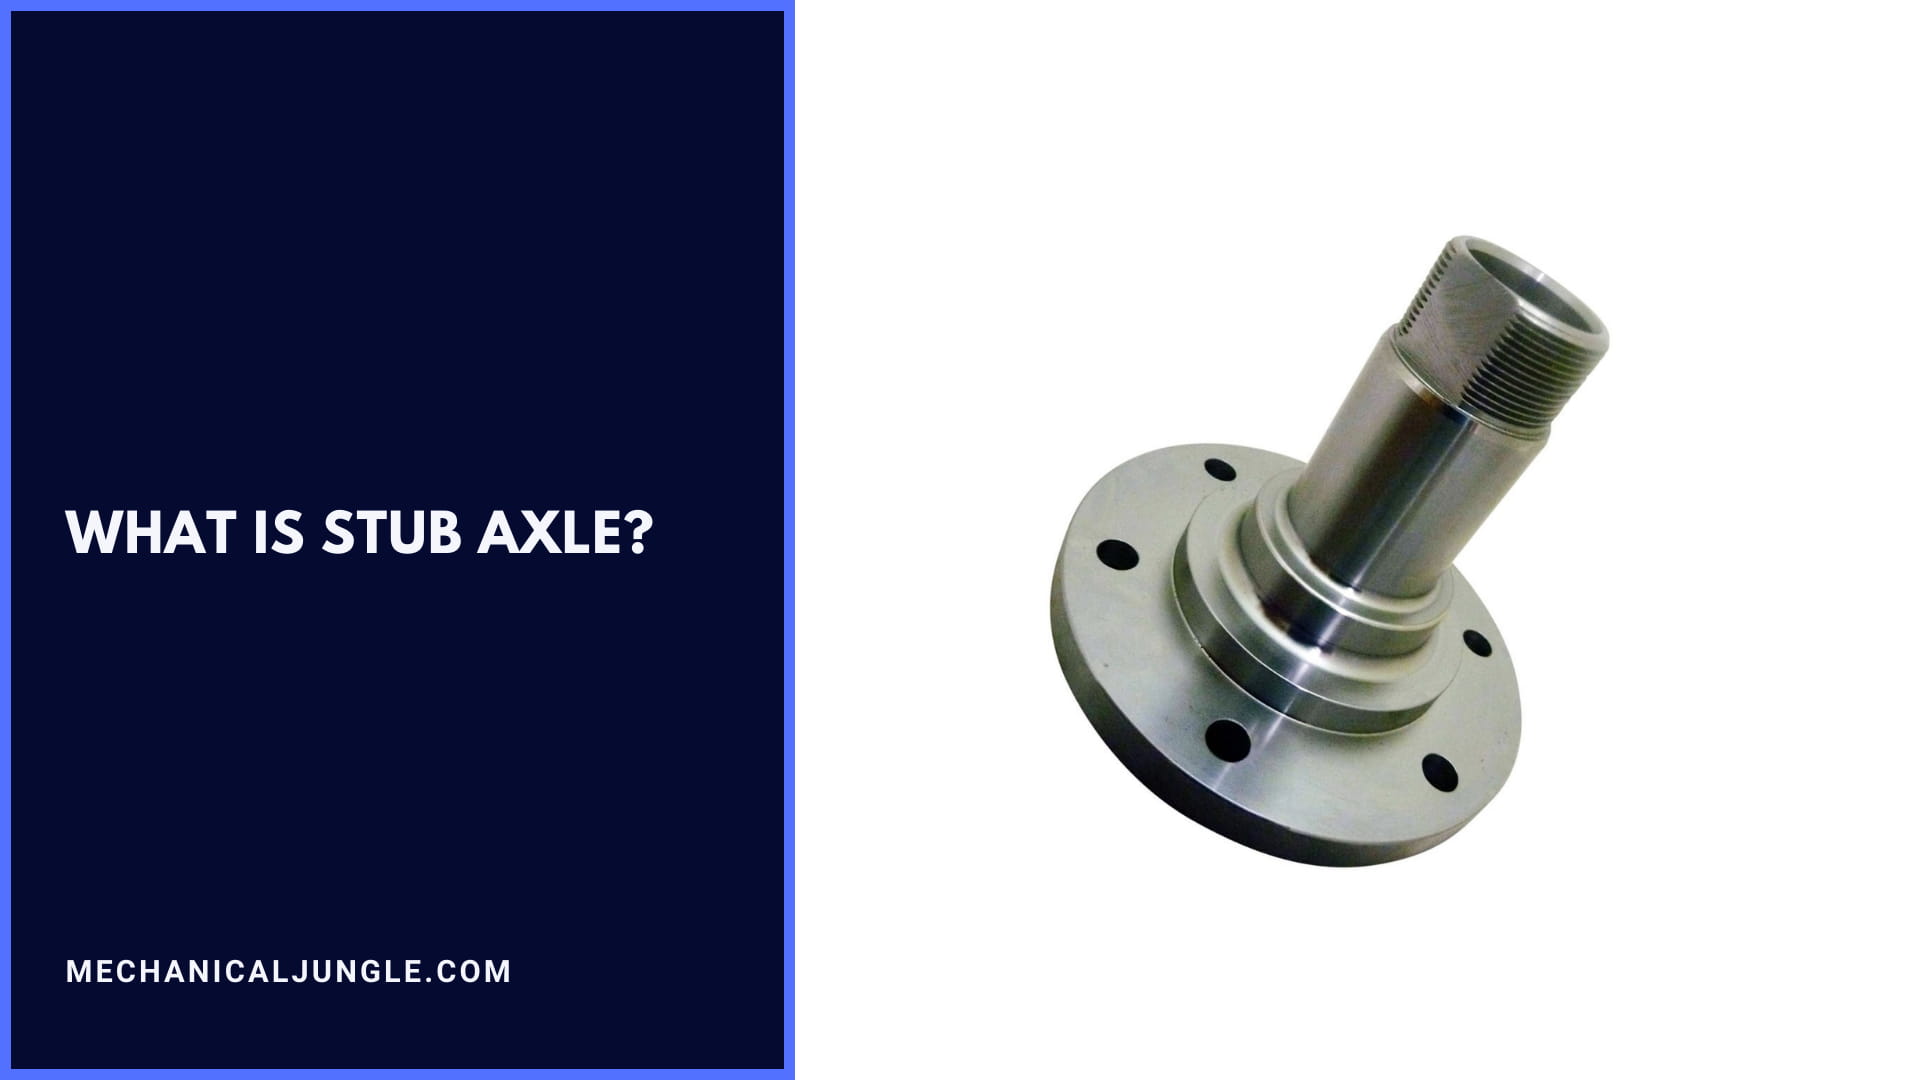 What Is Stub Axle?